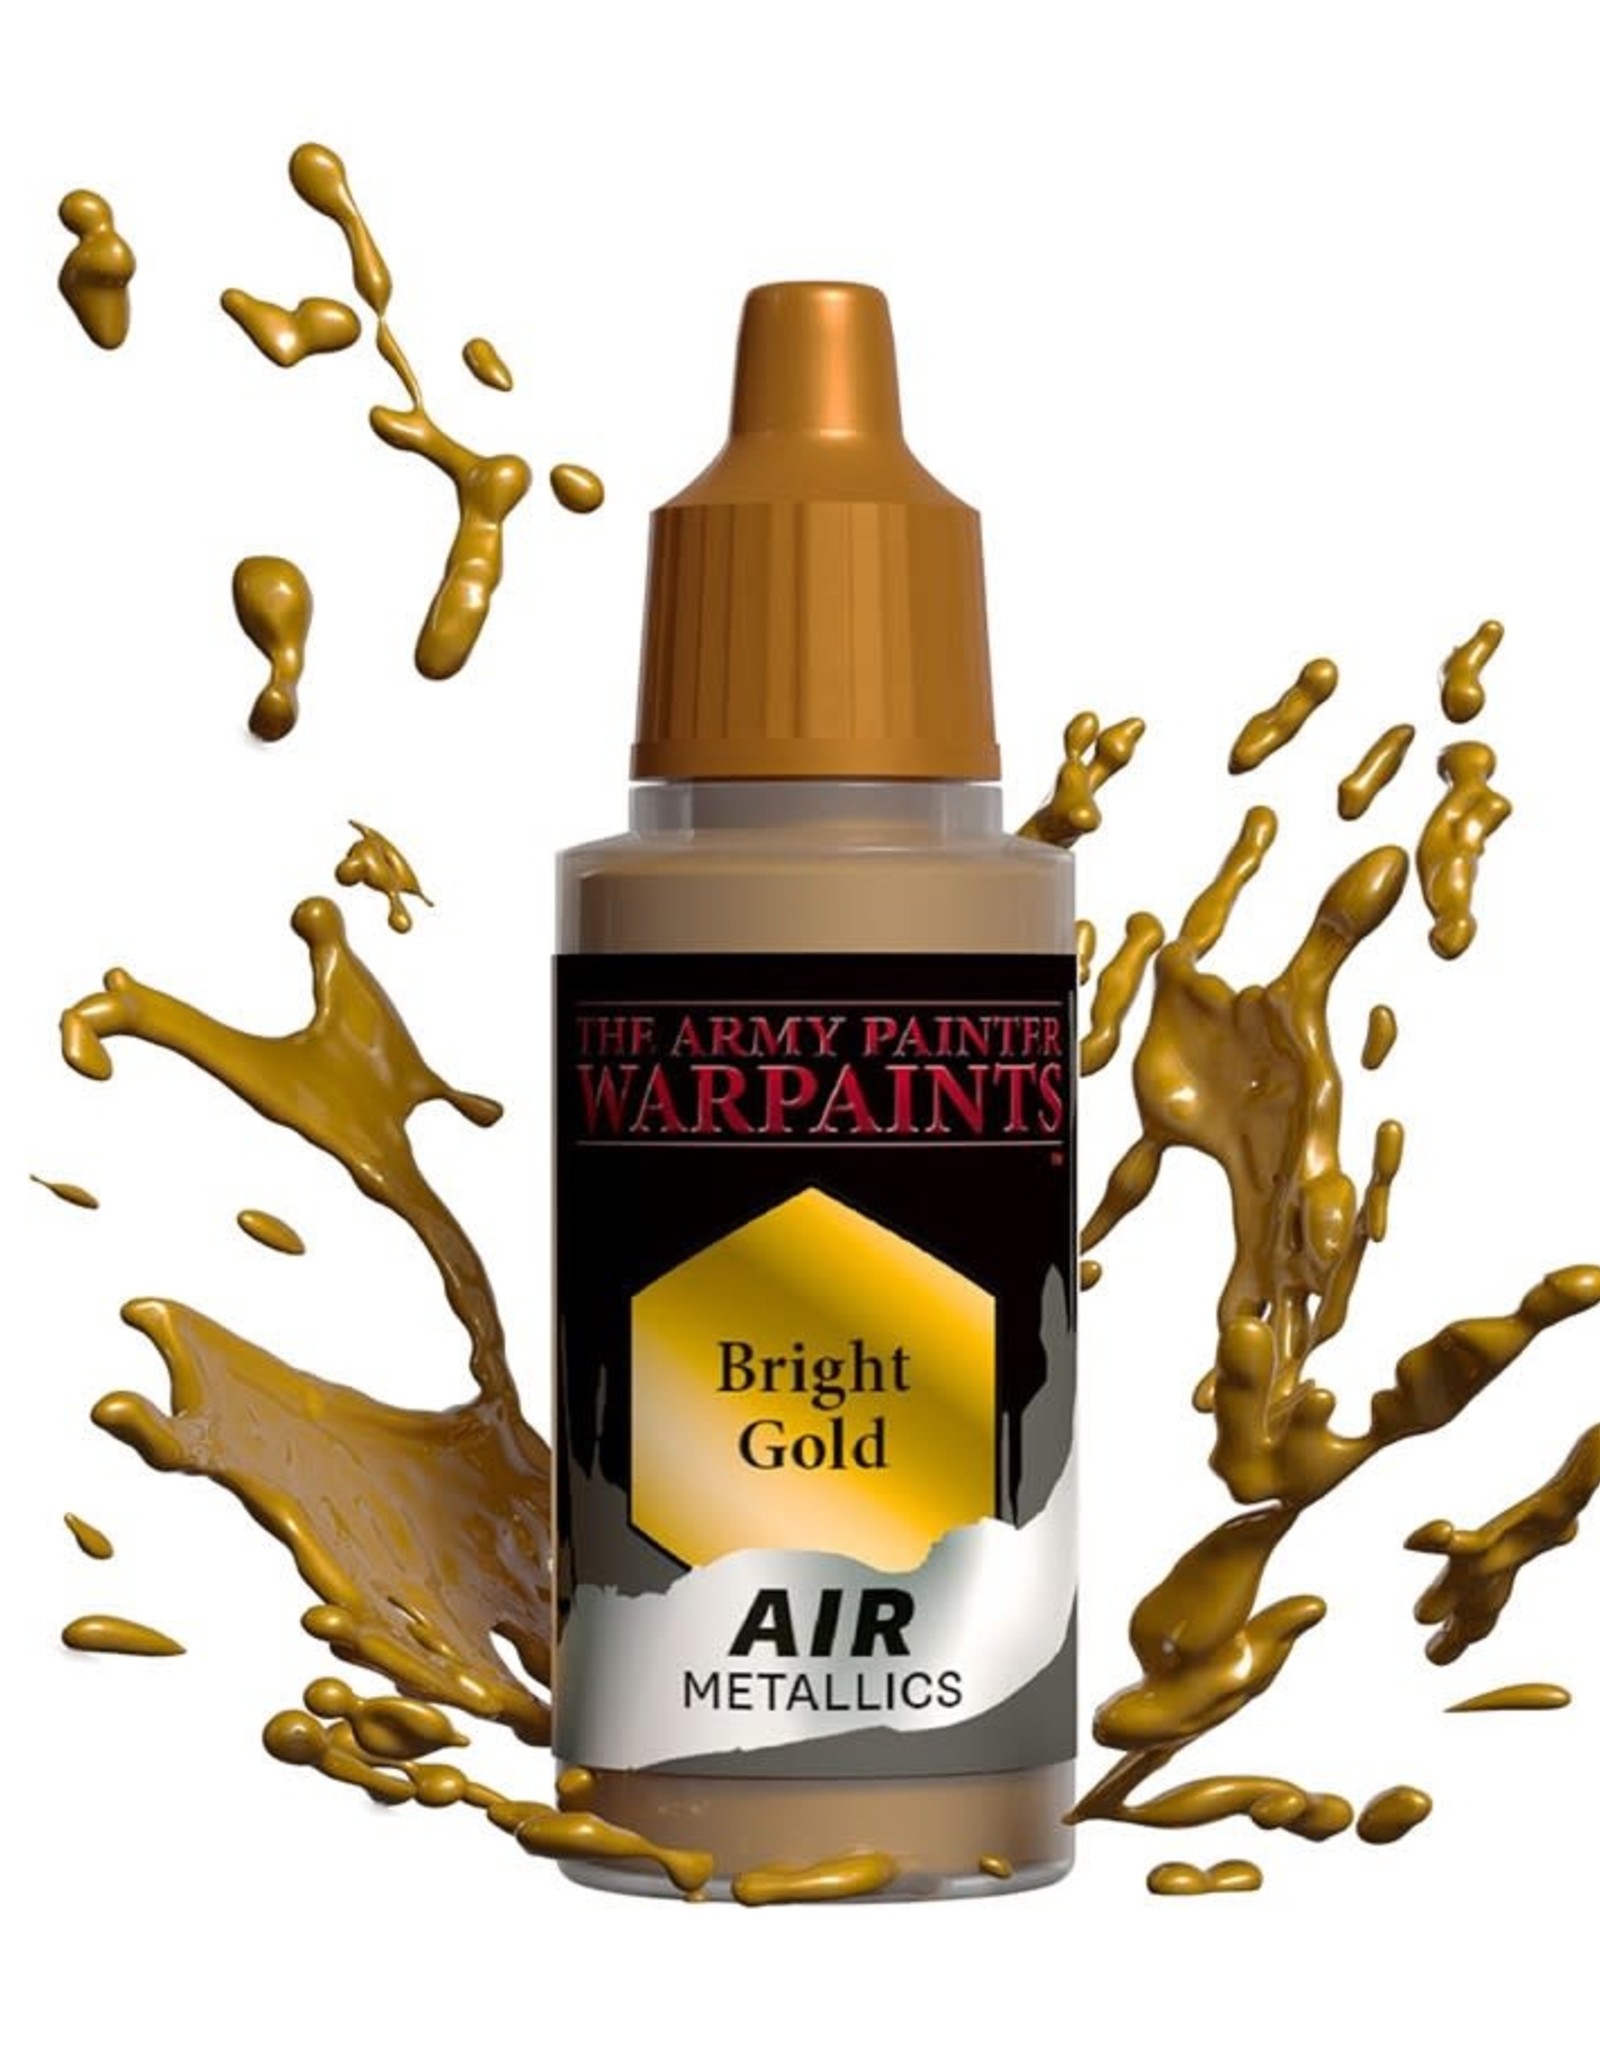 The Army Painter TAP Warpaints Air Metallics: Bright Gold